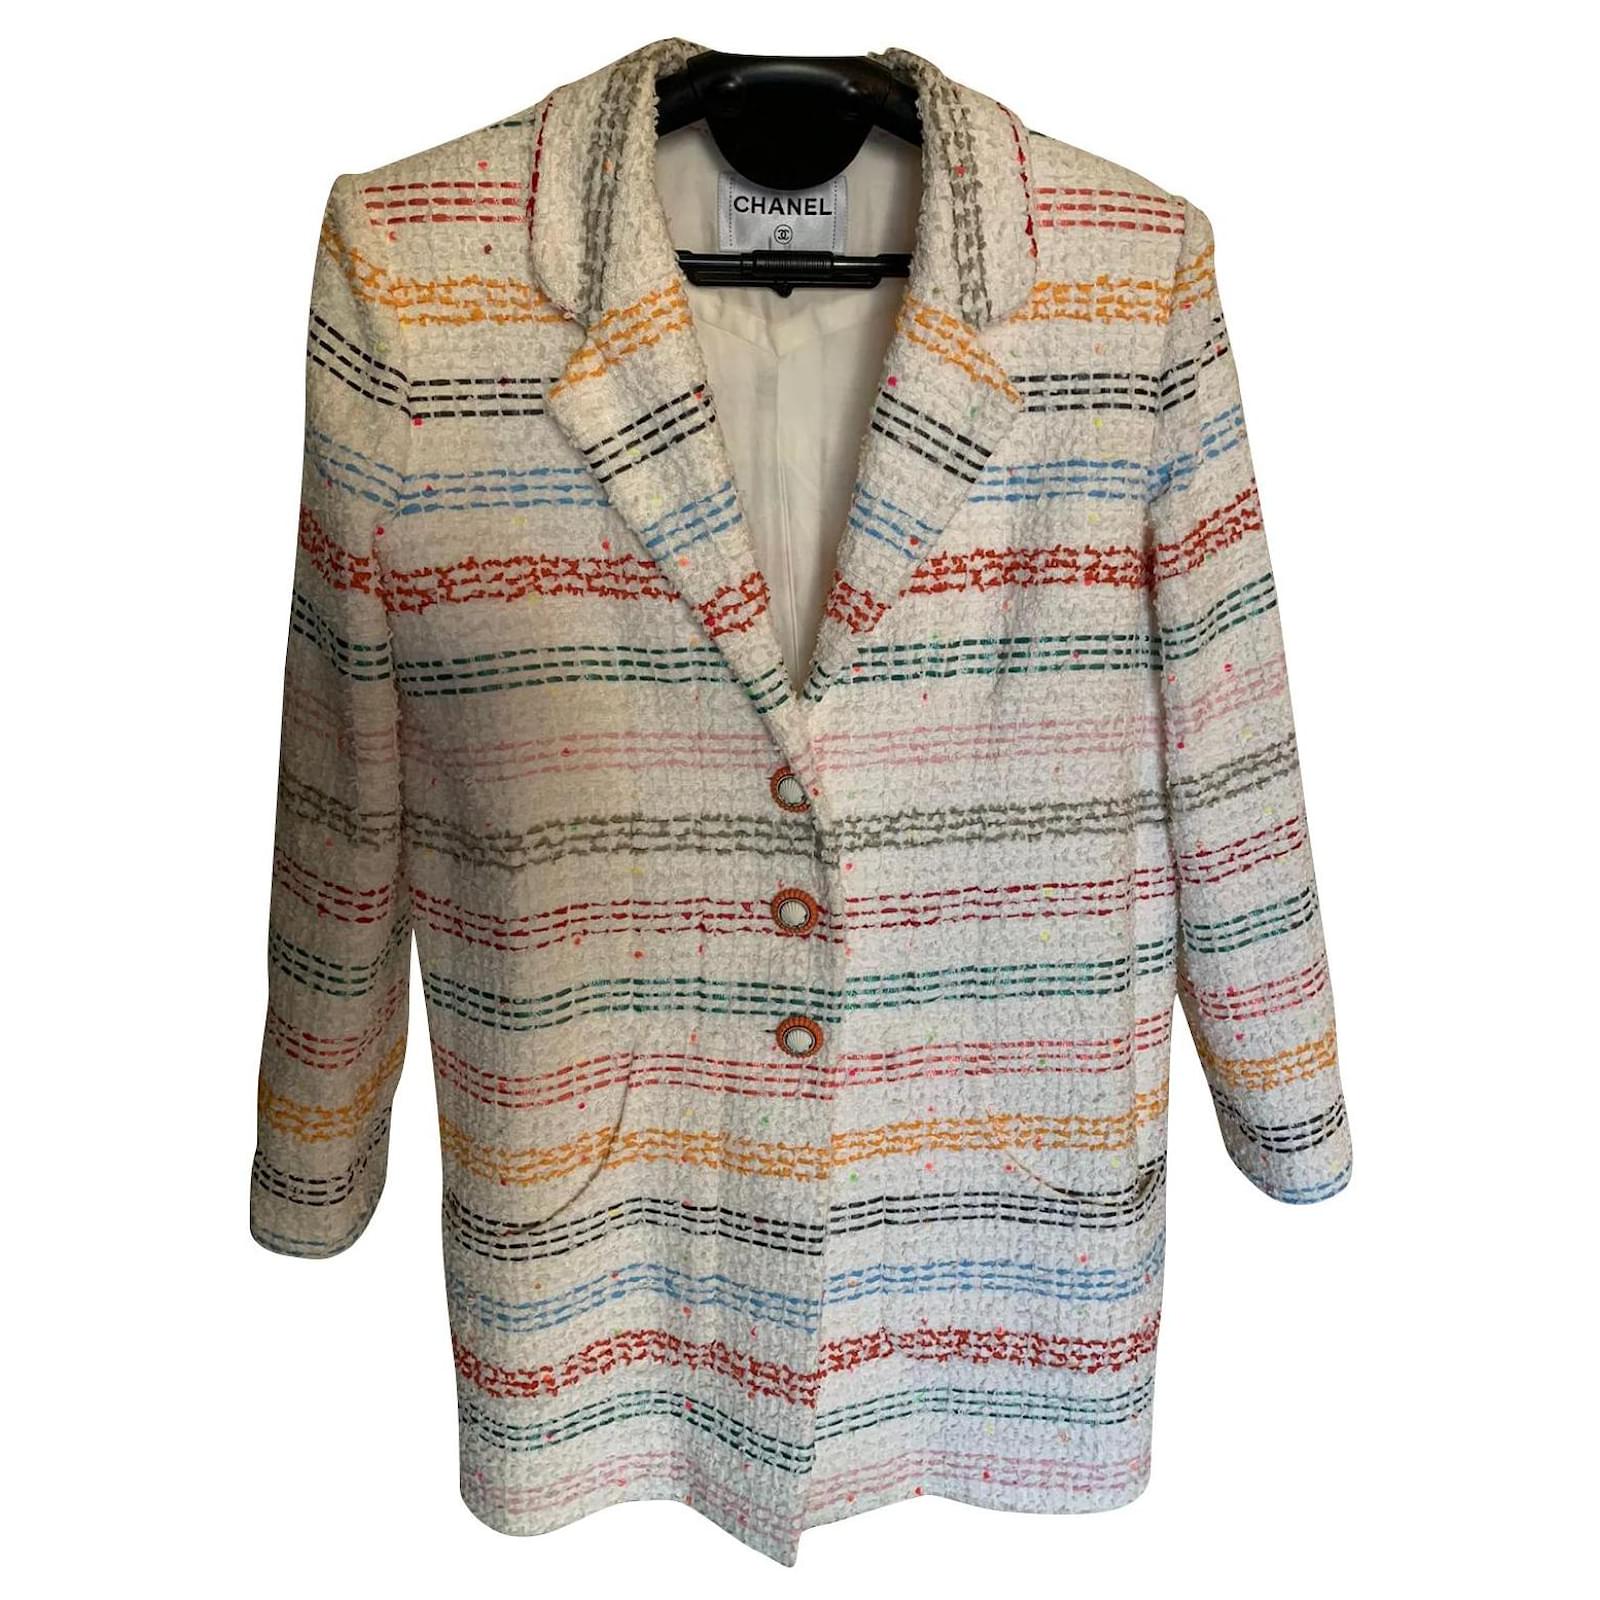 Coats, Outerwear Chanel Chanel 19P, 19S 2019 Spring Summer Runway Stripe White and Multicolor Long Oversized Fit Cotton Tweed Jacket Coat!